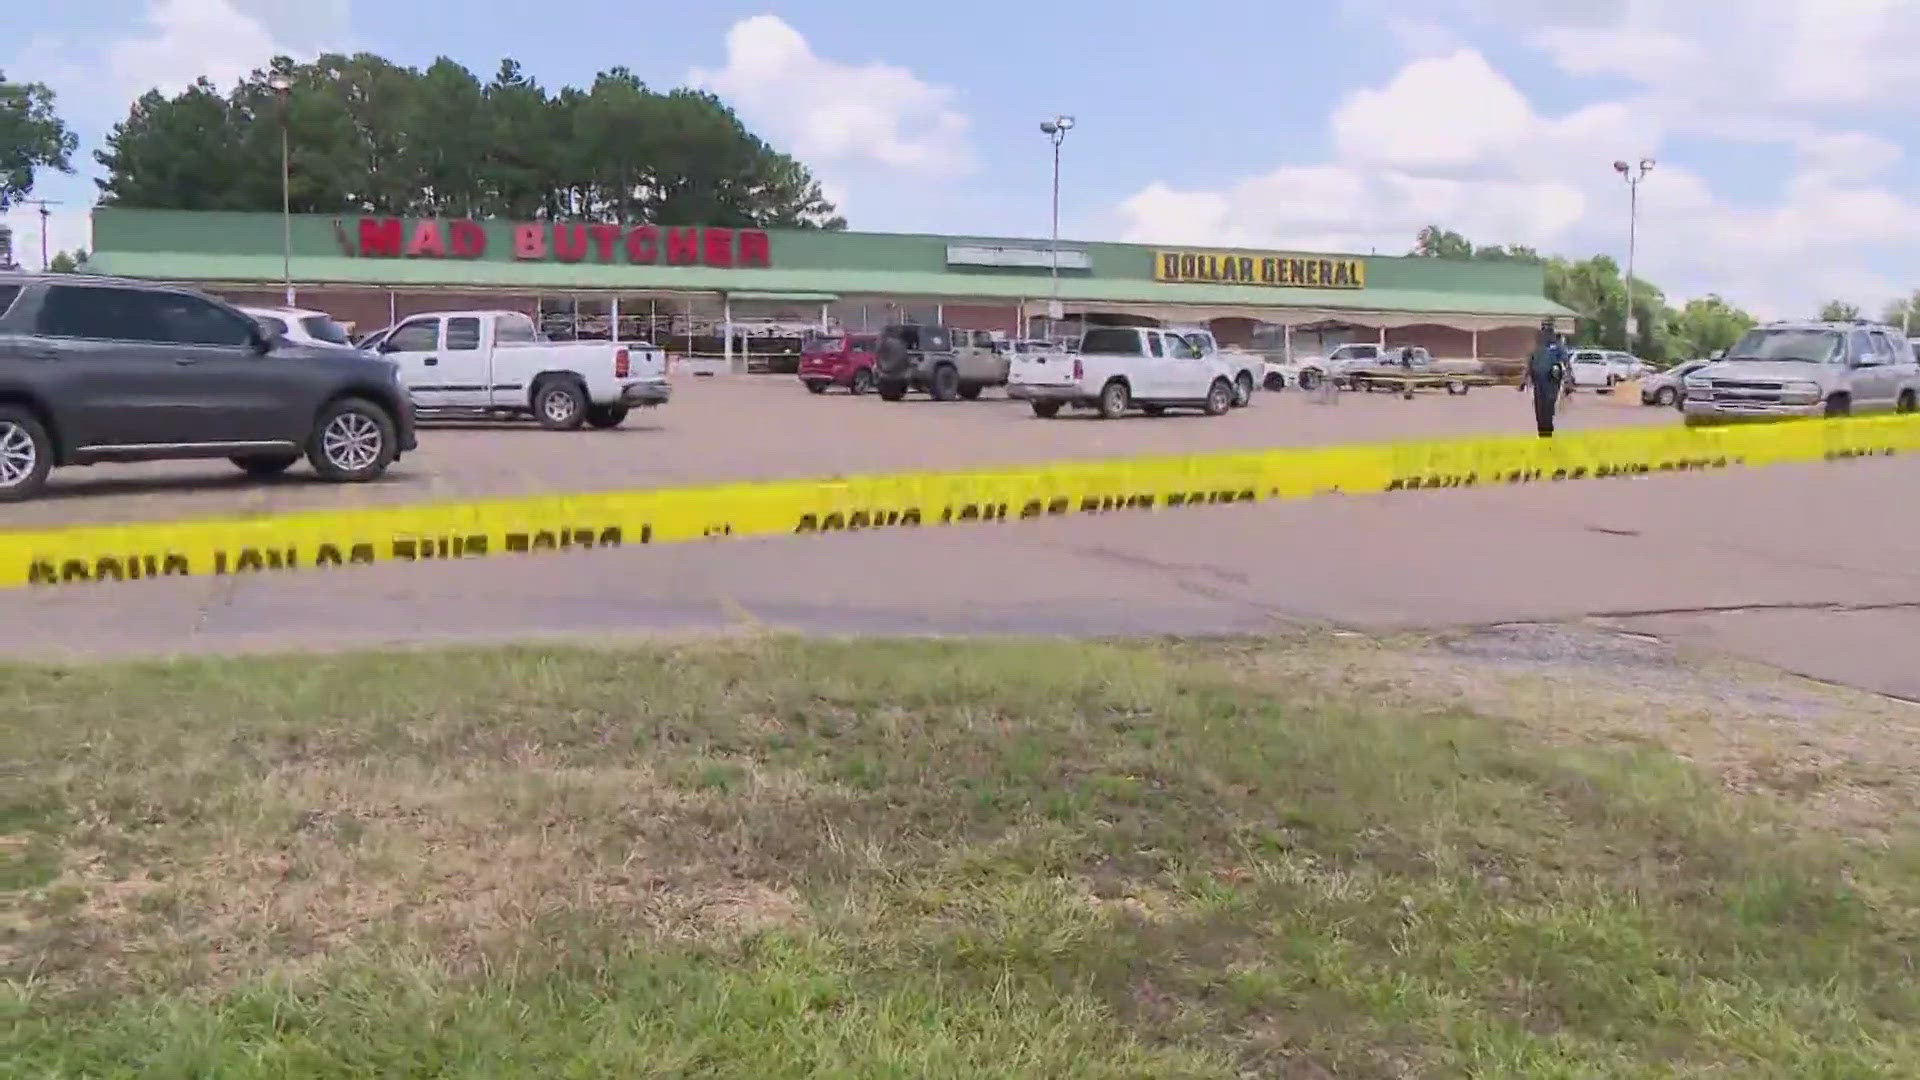 Arkansas State Police have confirmed that 3 people have died and multiple others were shot during an incident at a Fordyce grocery store on Friday.